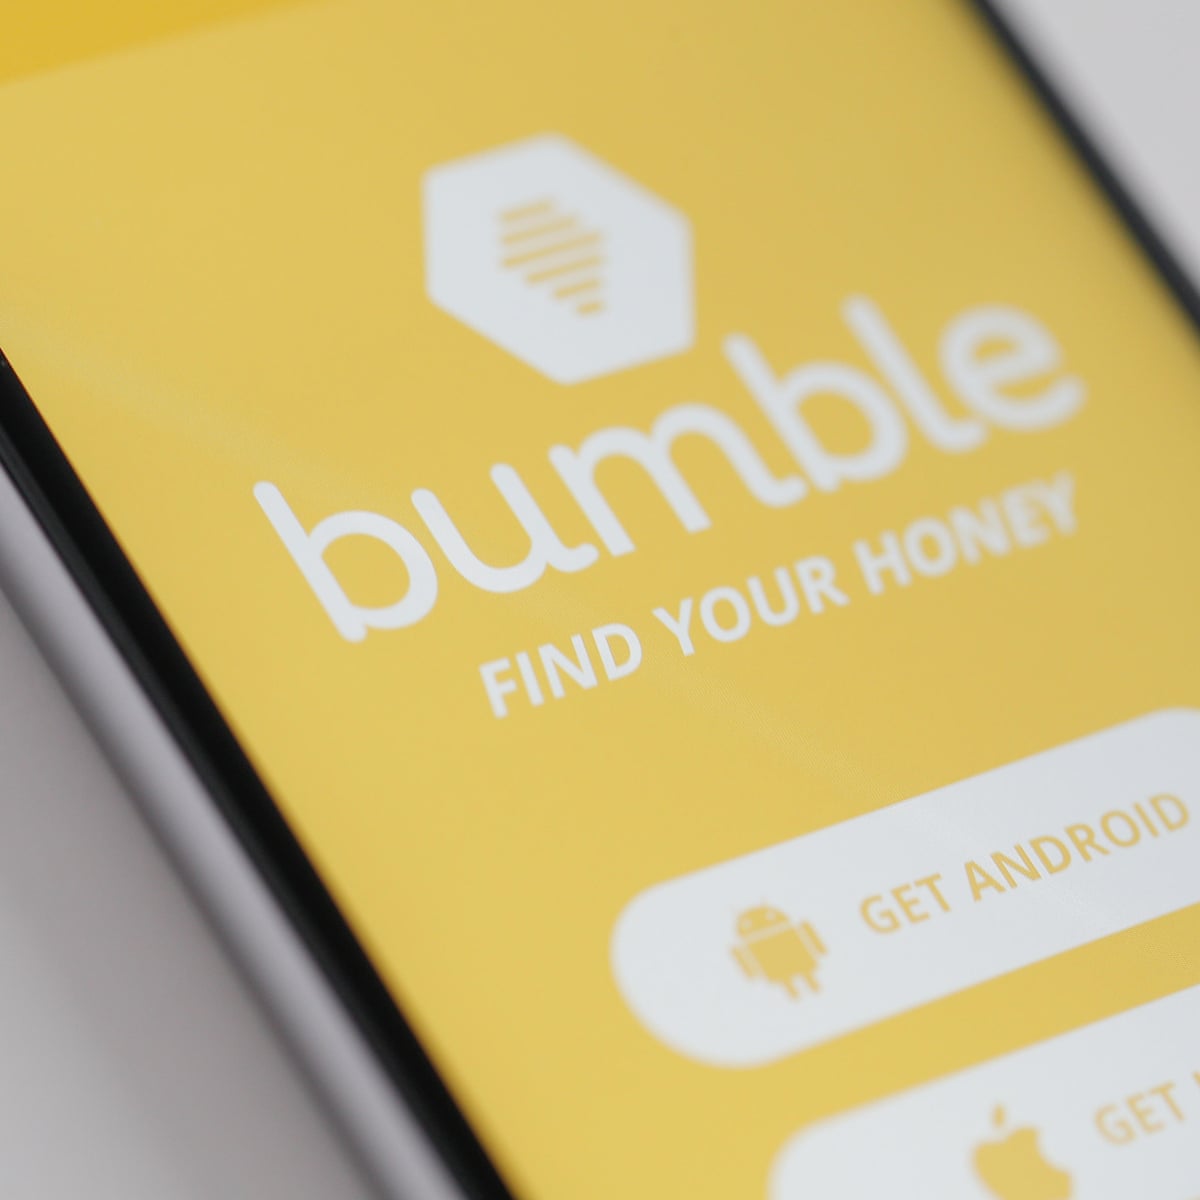 Dating app Bumble to ban users for body shaming | Dating | The Guardian